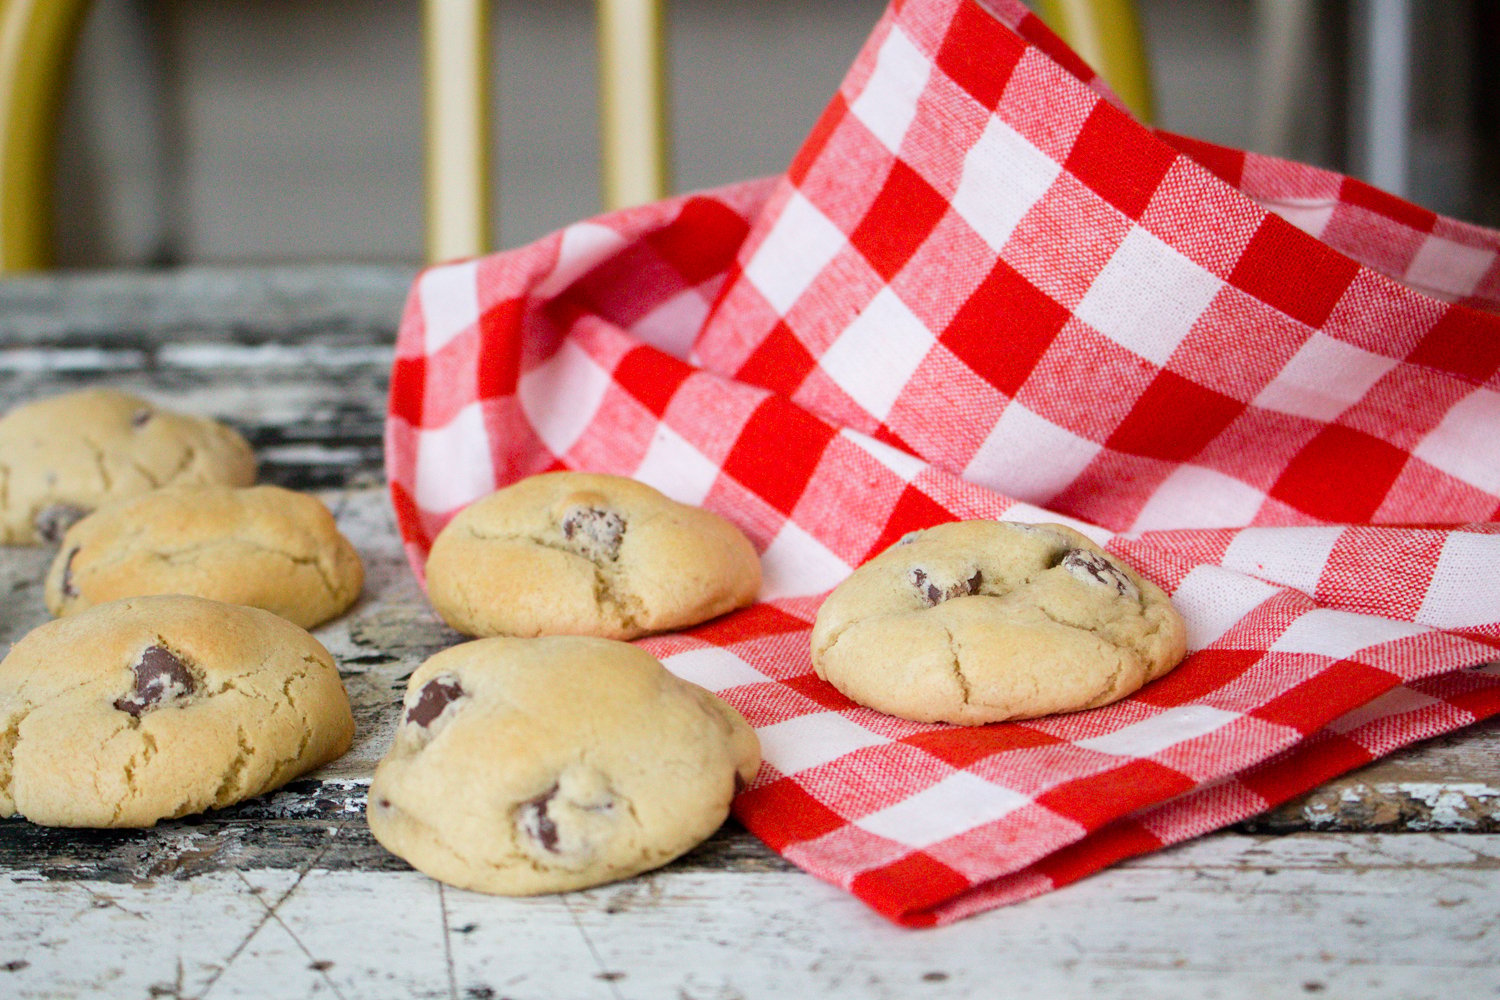 The Kentucky Gent, a Louisville, Kentucky life and style blogger, shares his recipe for Chocolate Chip Cookies.